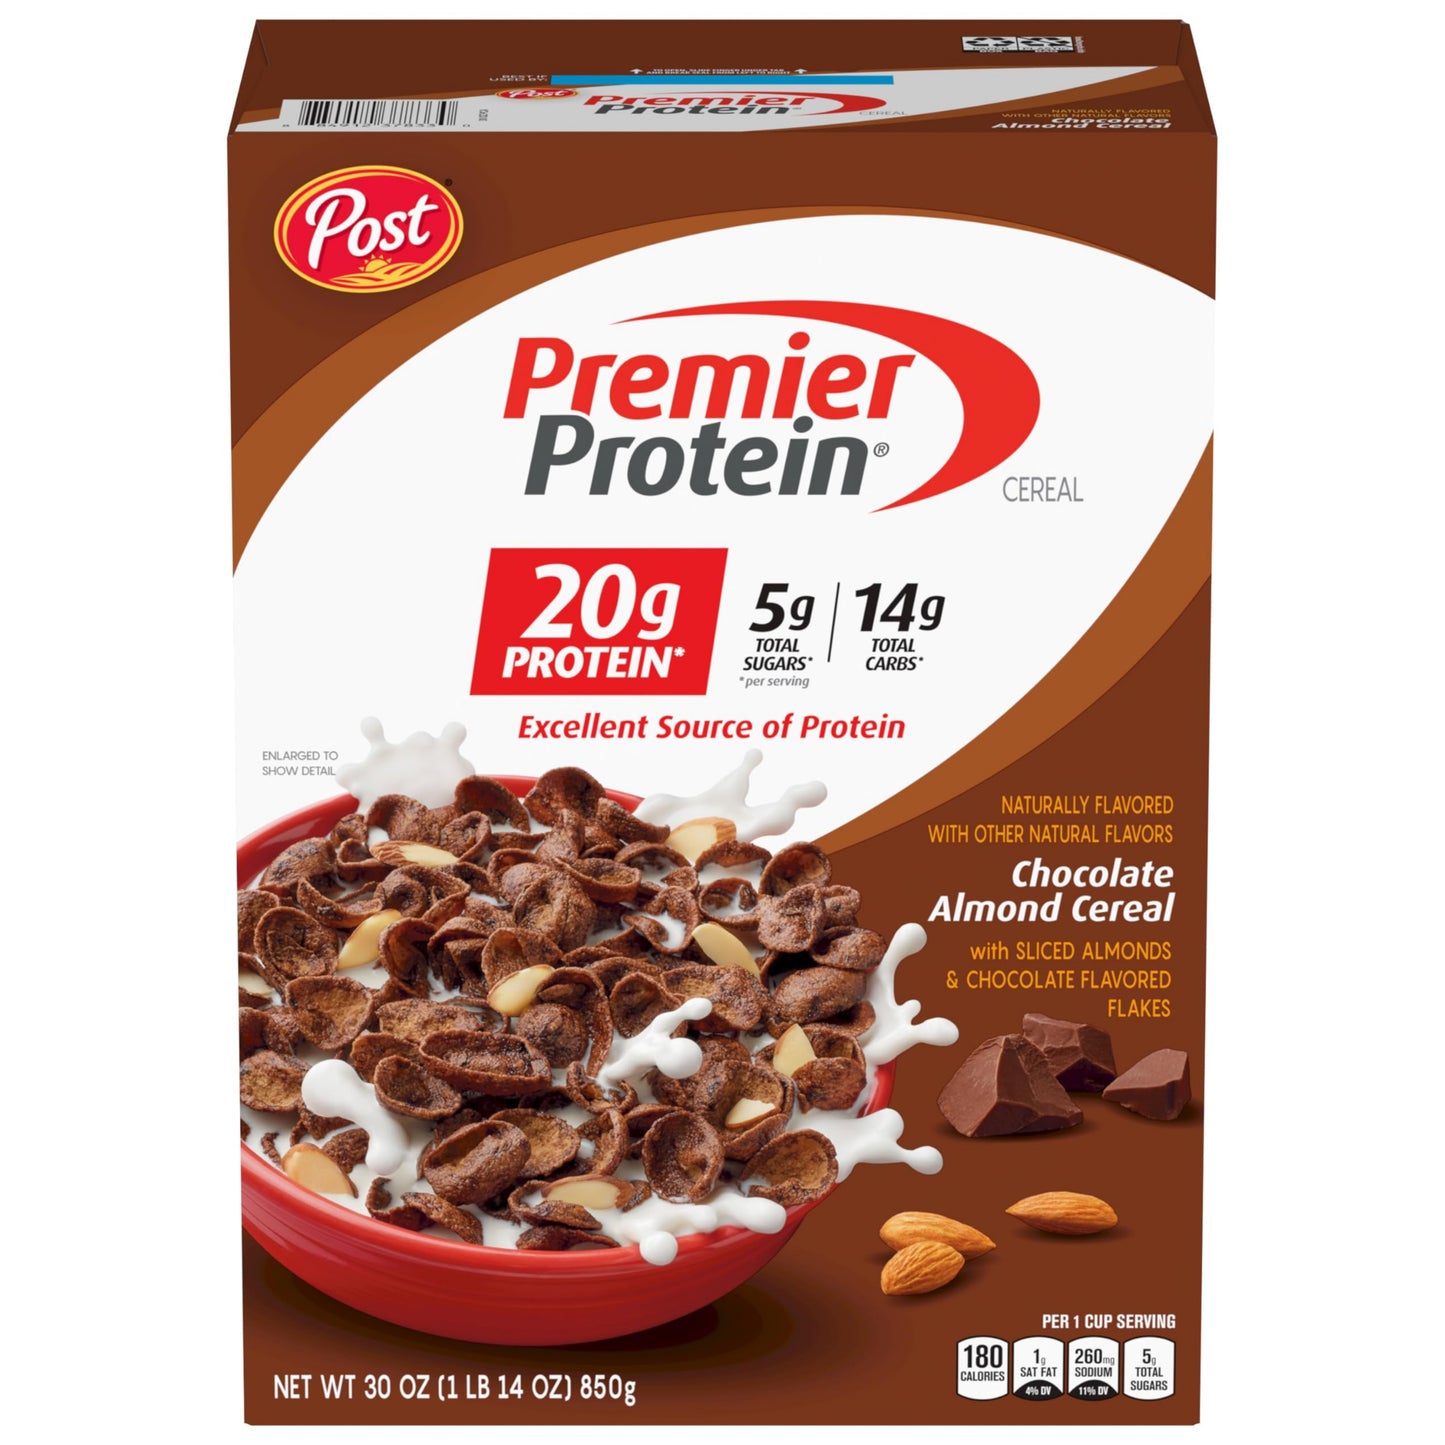 Post Premier Protein Cereal 